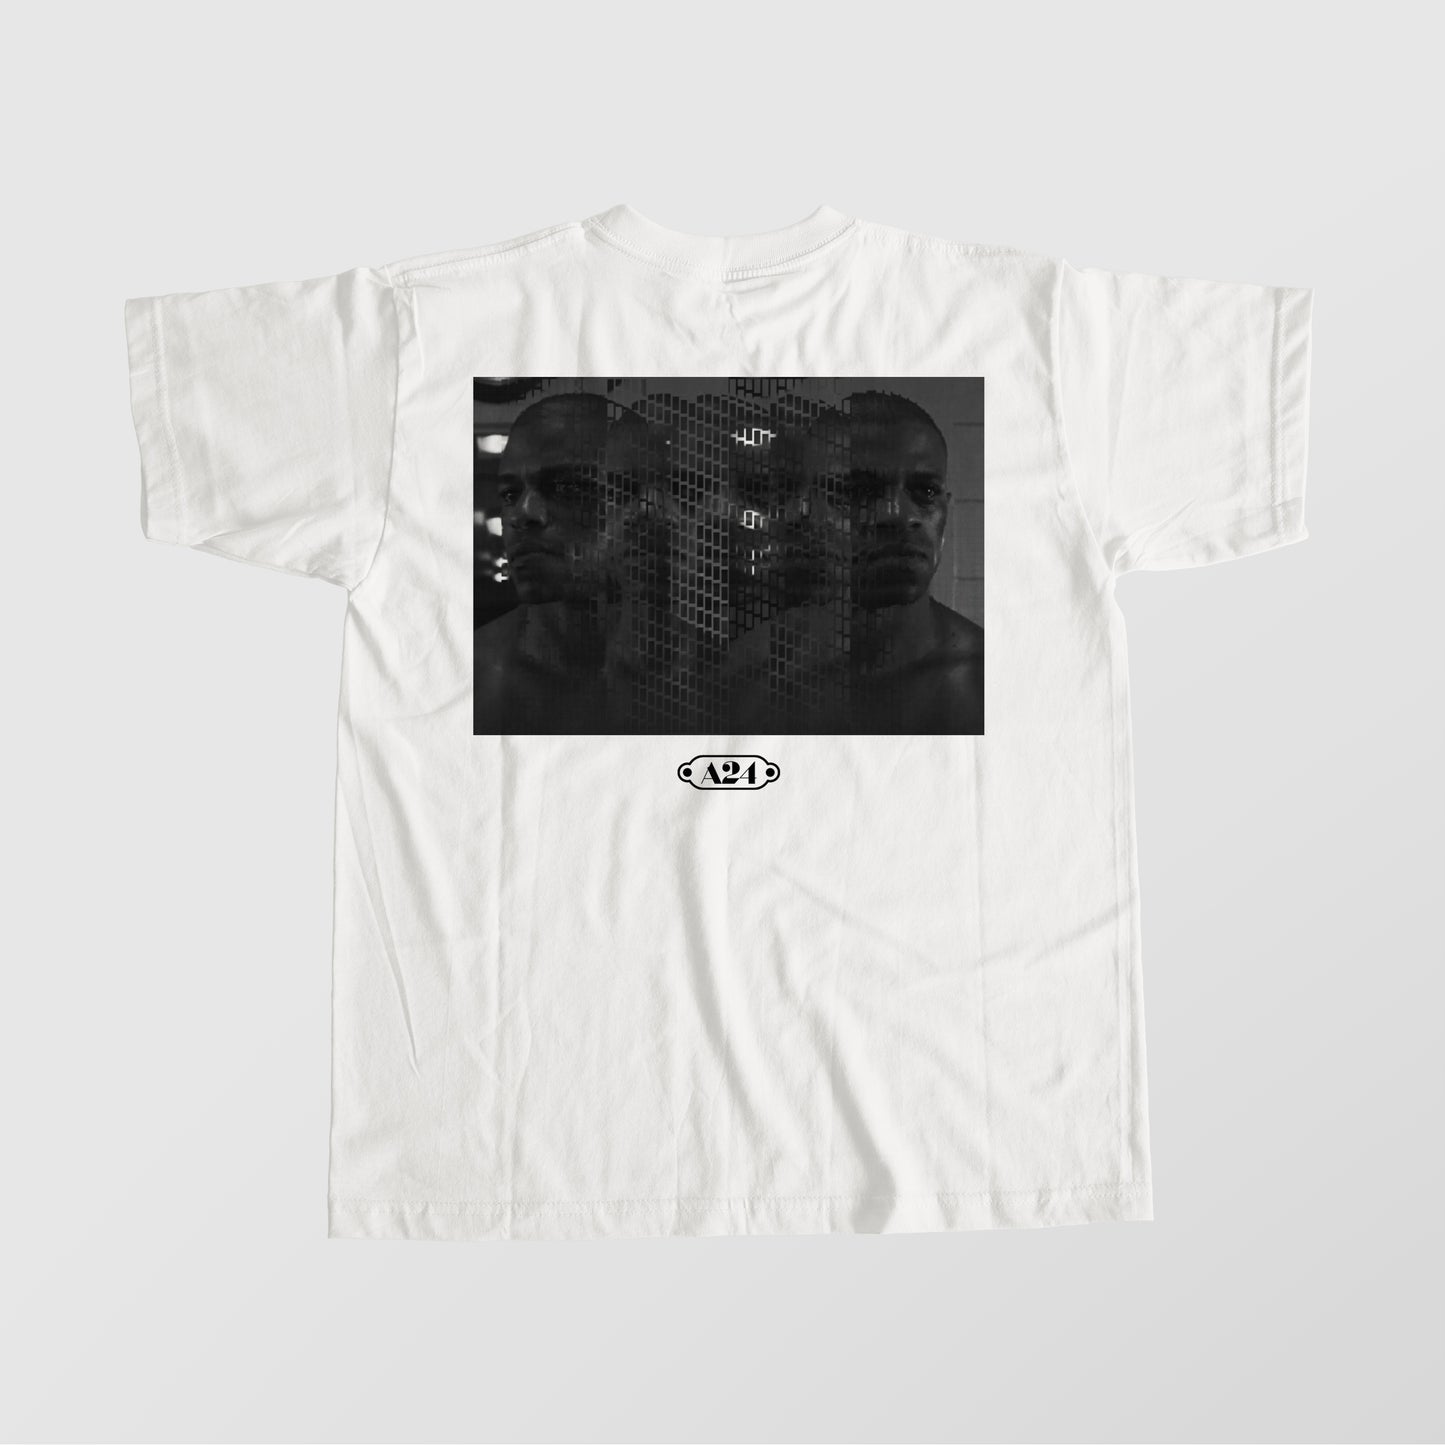 The INSPECTION w/cobird Tee